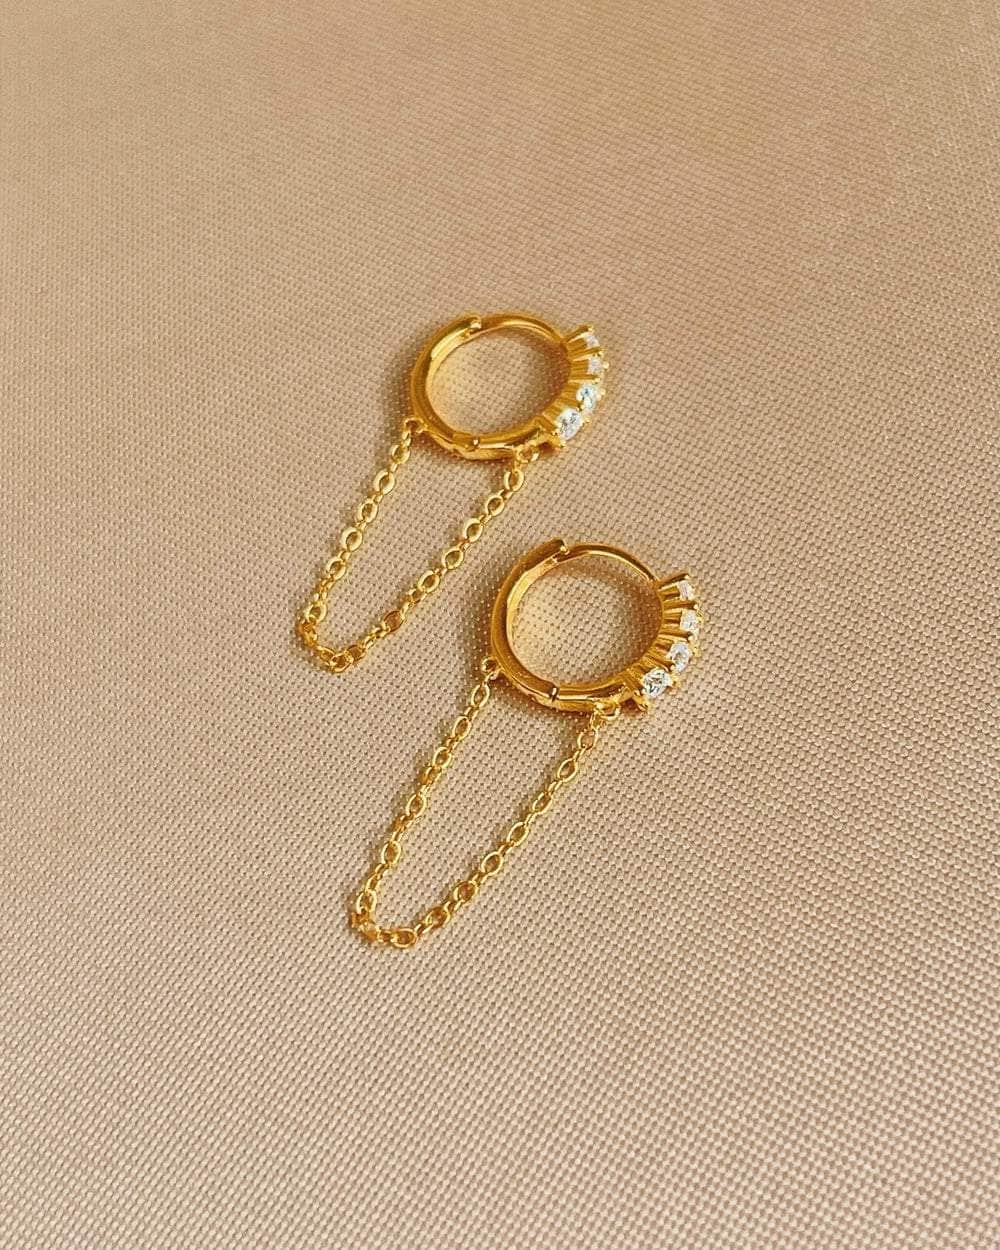 So Dainty Co. Chain / Dangle Earrings Sienna Gold Chain Huggies Gold Plated 925 Sterling Silver Jewelry